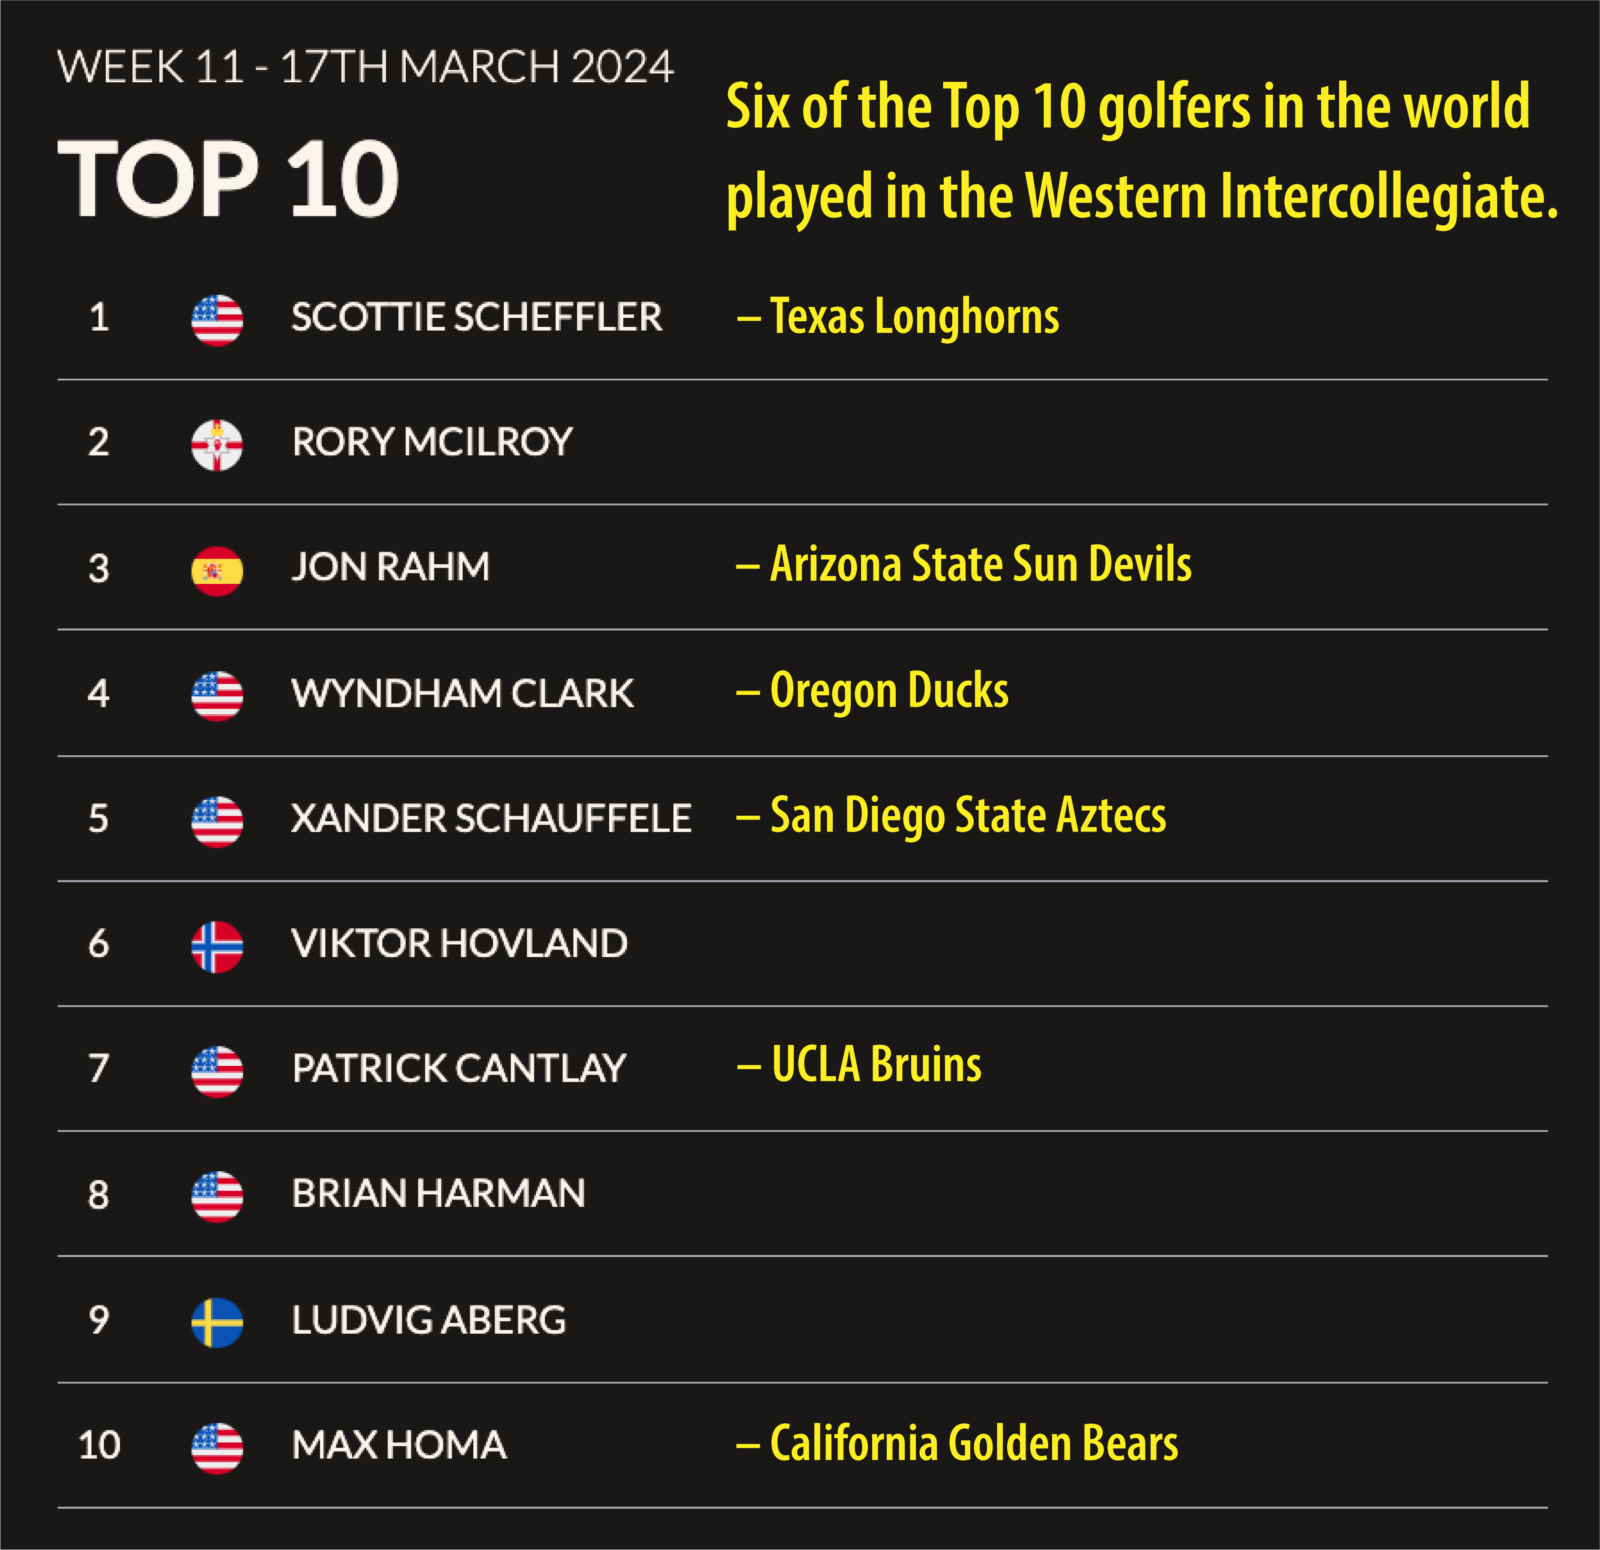 Six of the Top 10 golfers in the world played in the Western Intercollegiate. (OWGR ranking as of Mar. 17, 2024)